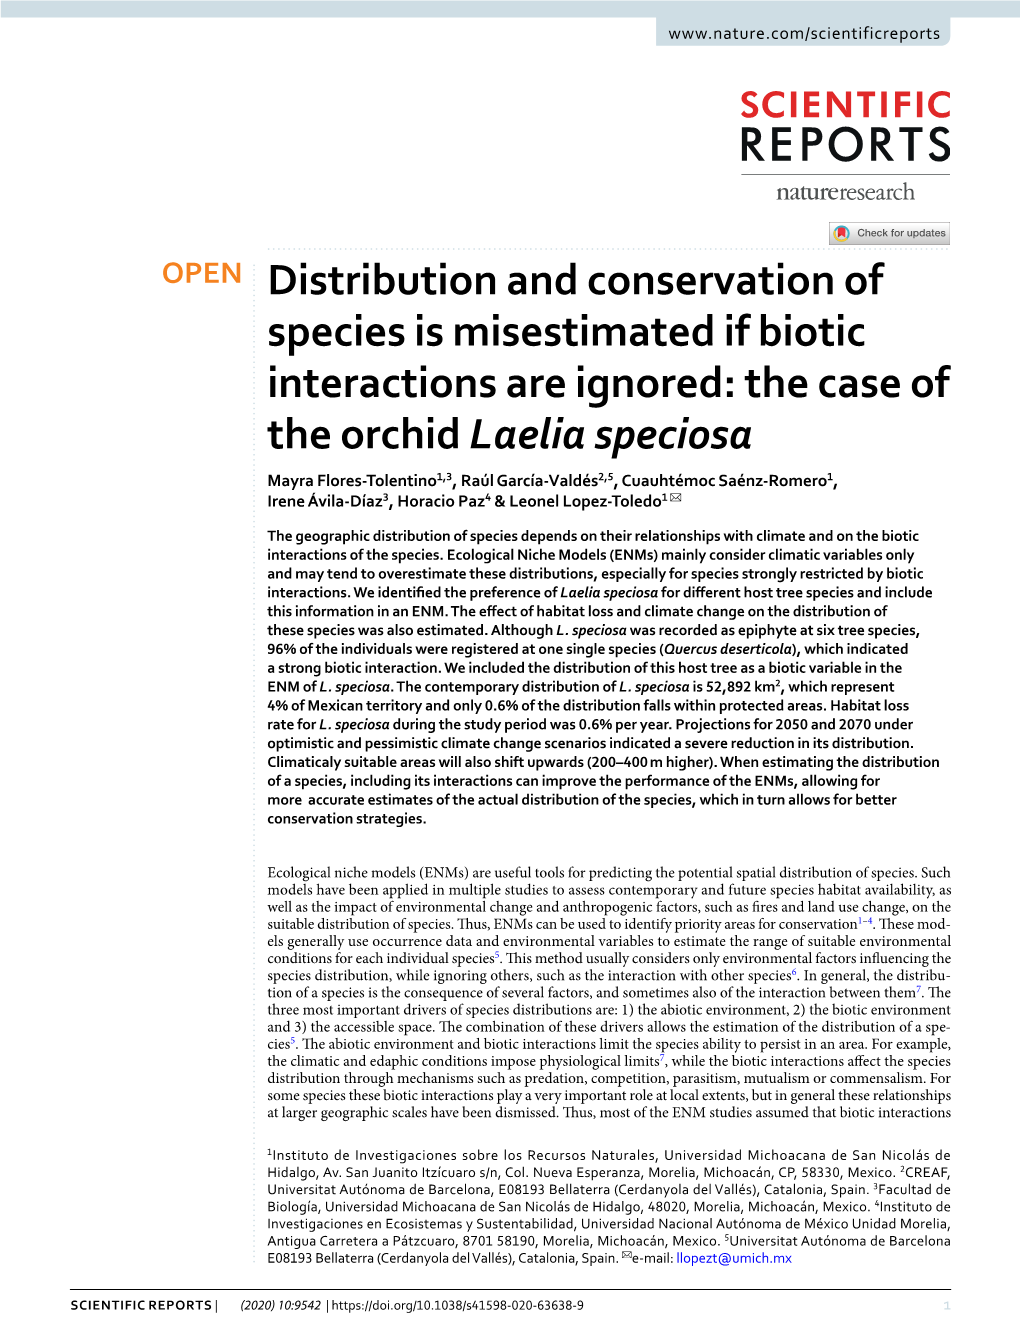 Distribution and Conservation of Species Is Misestimated If